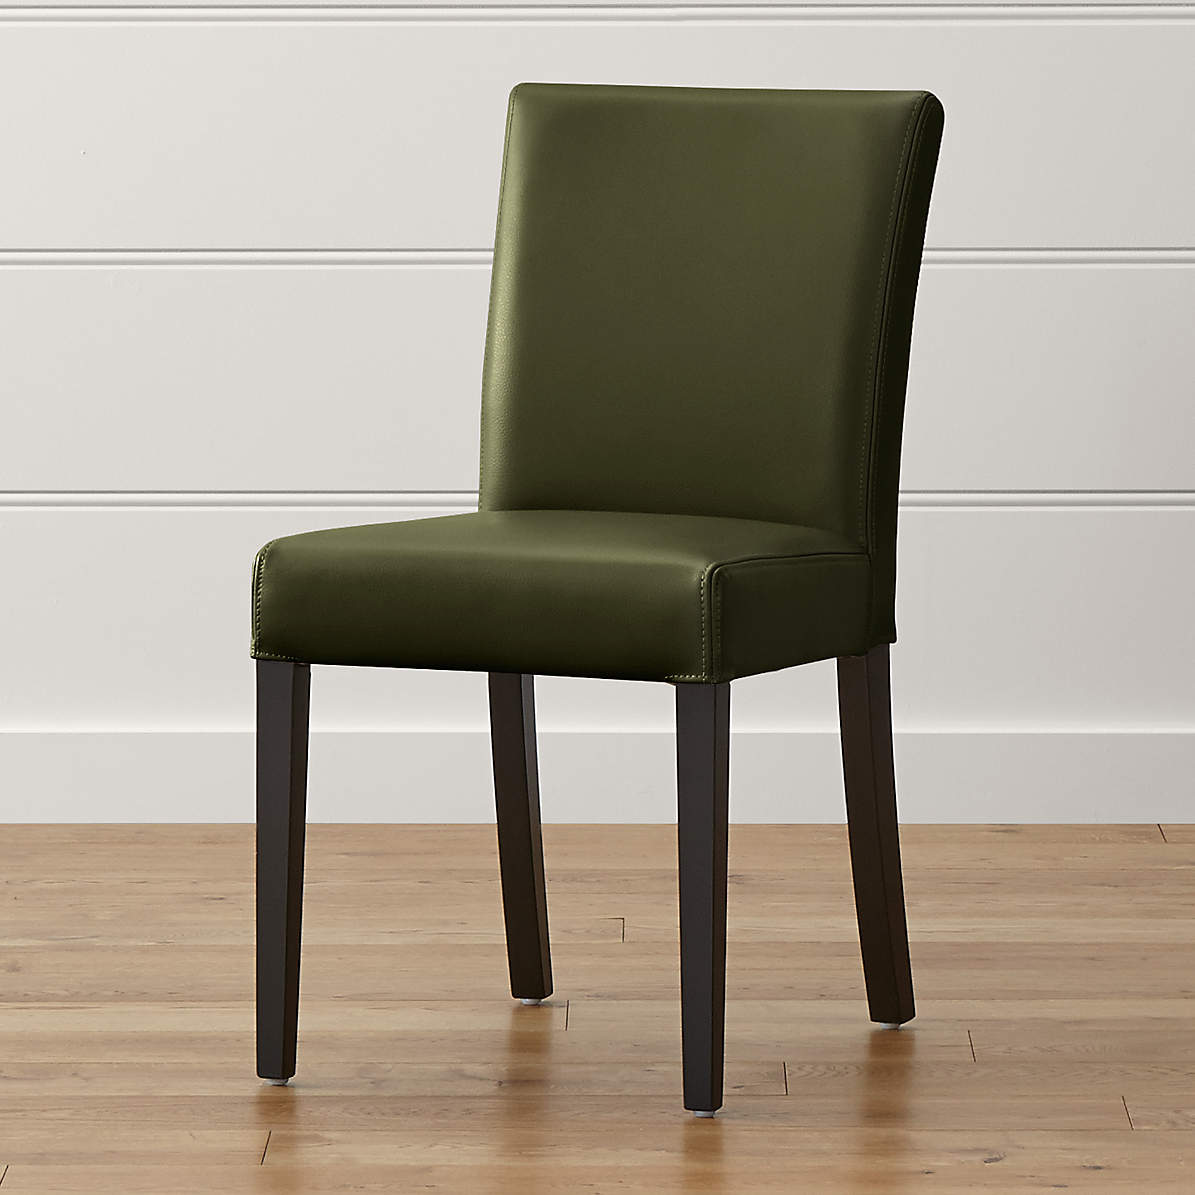 Lowe Olive Leather Dining Chair, Green Leather Dining Chair